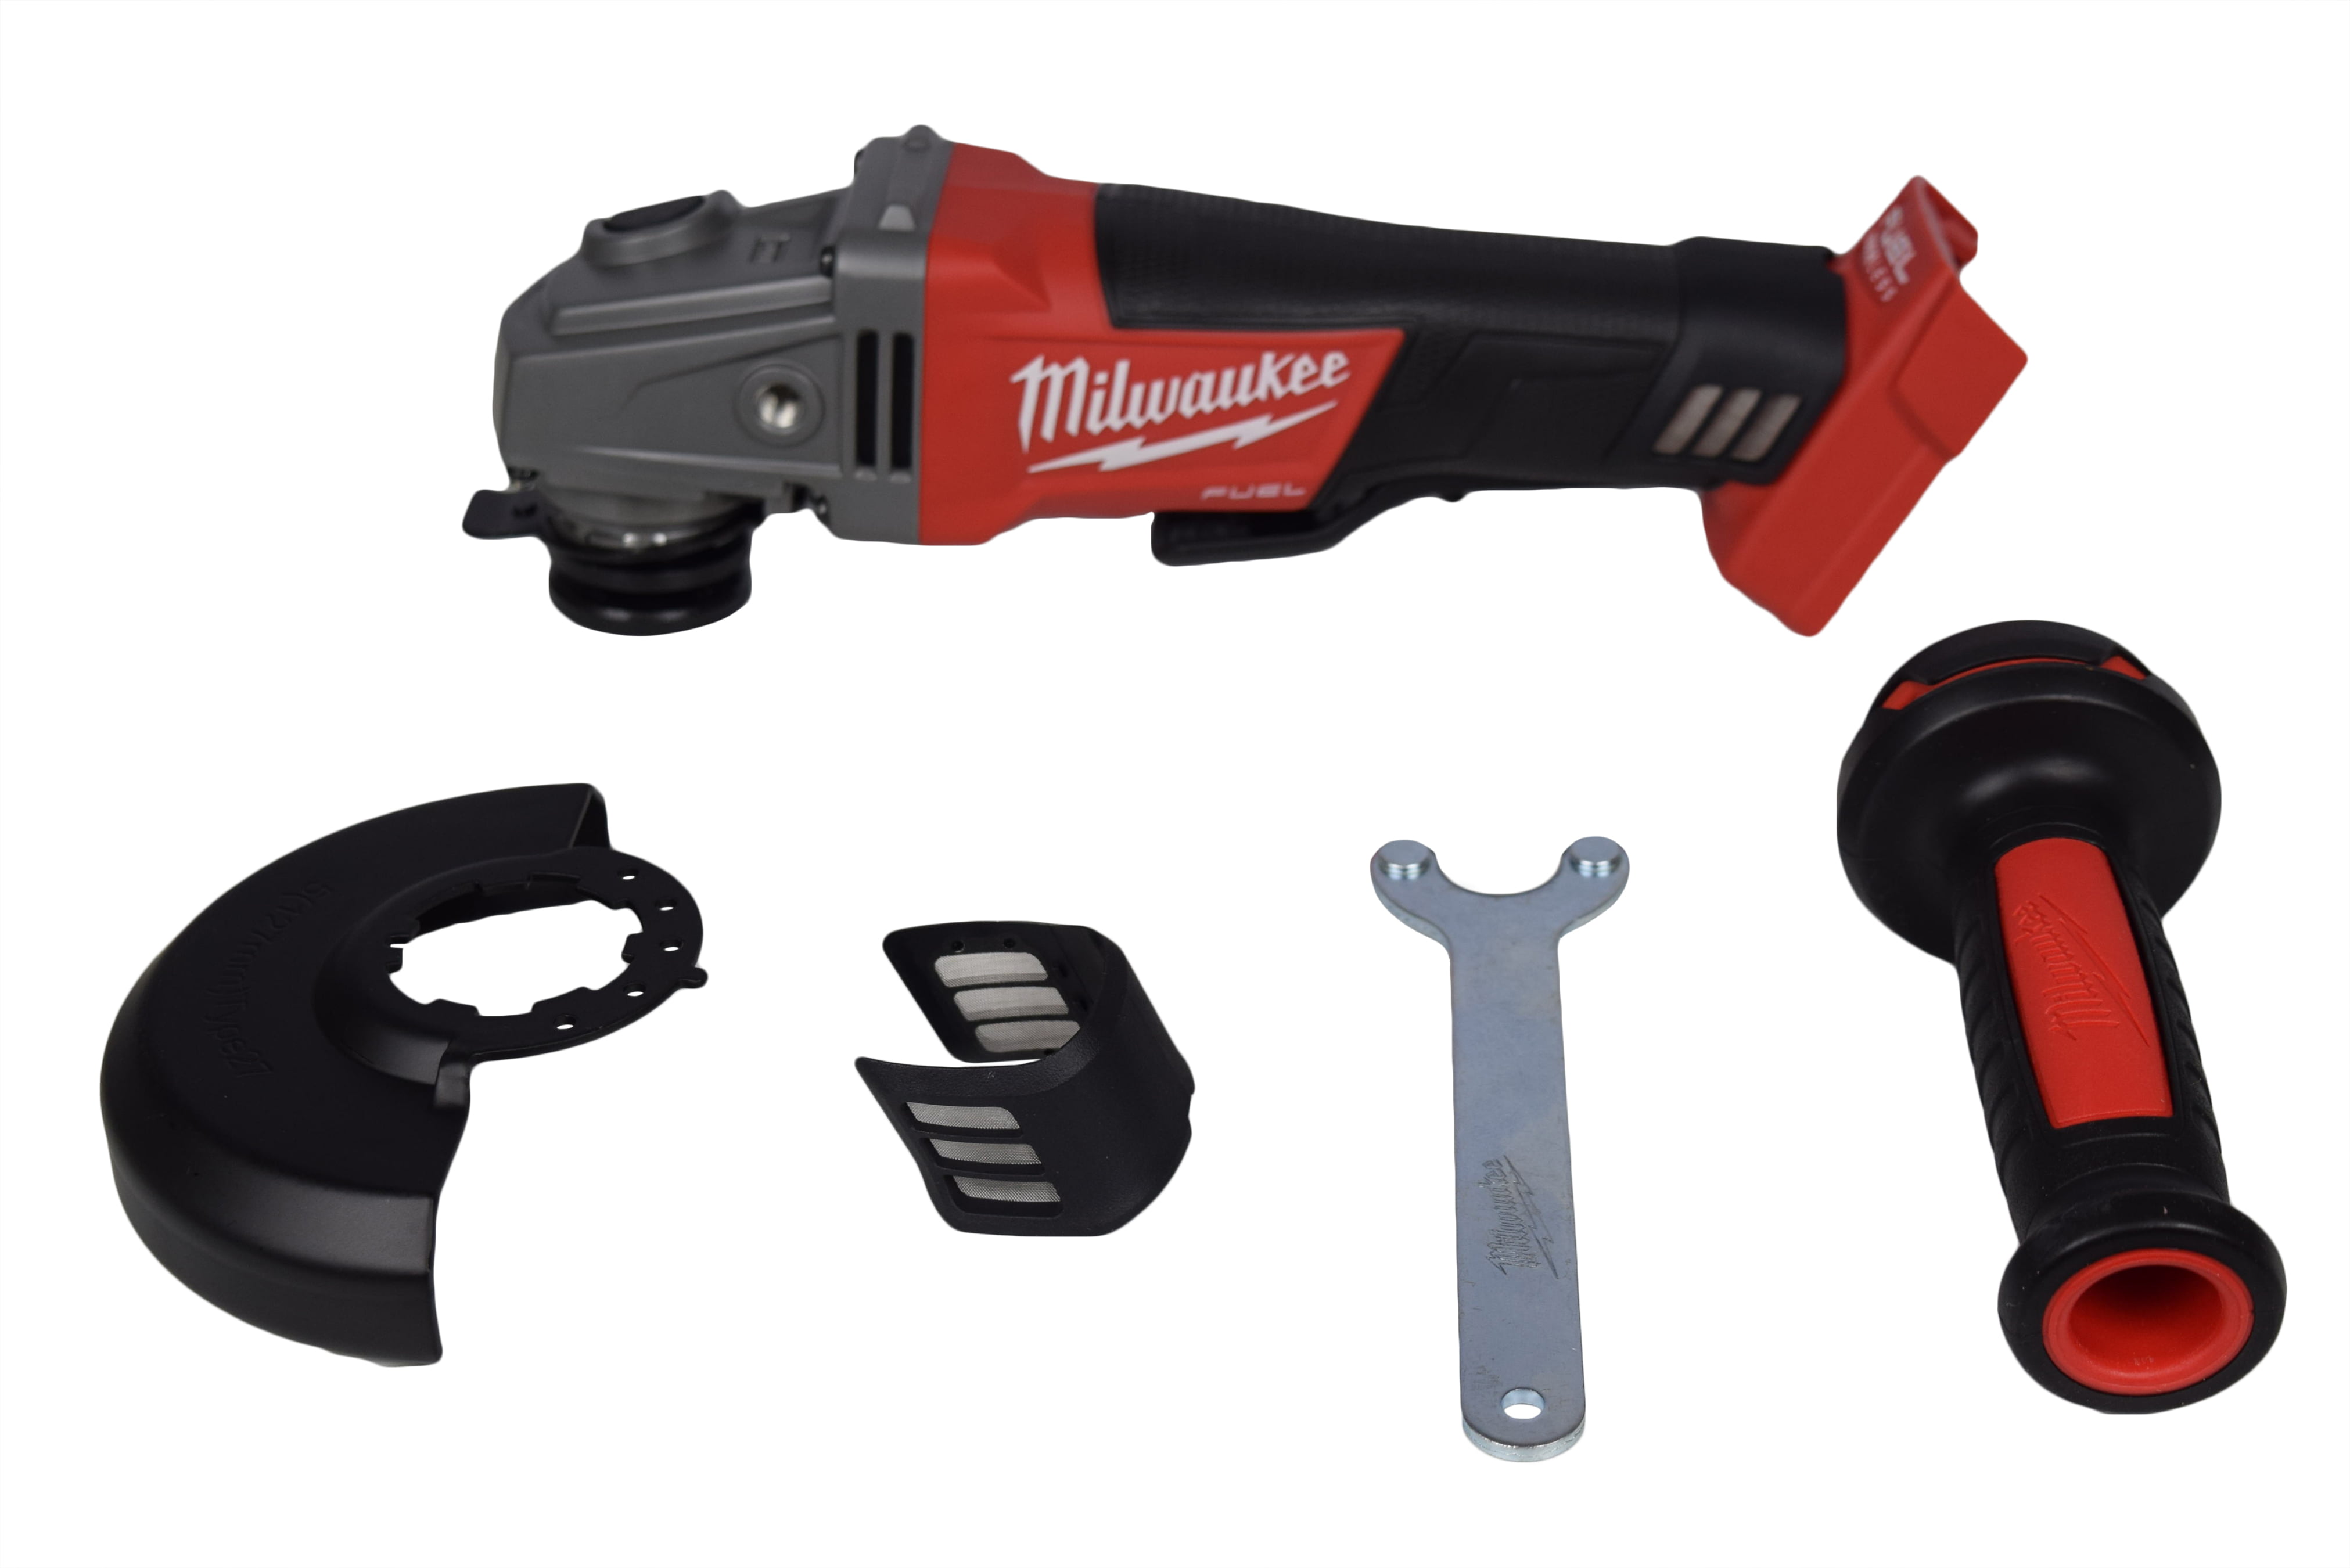 Milwaukee 2780-21 M18 FUEL 4-1/2 in Grinder Paddle No-Lock 1 Battery / 5 in